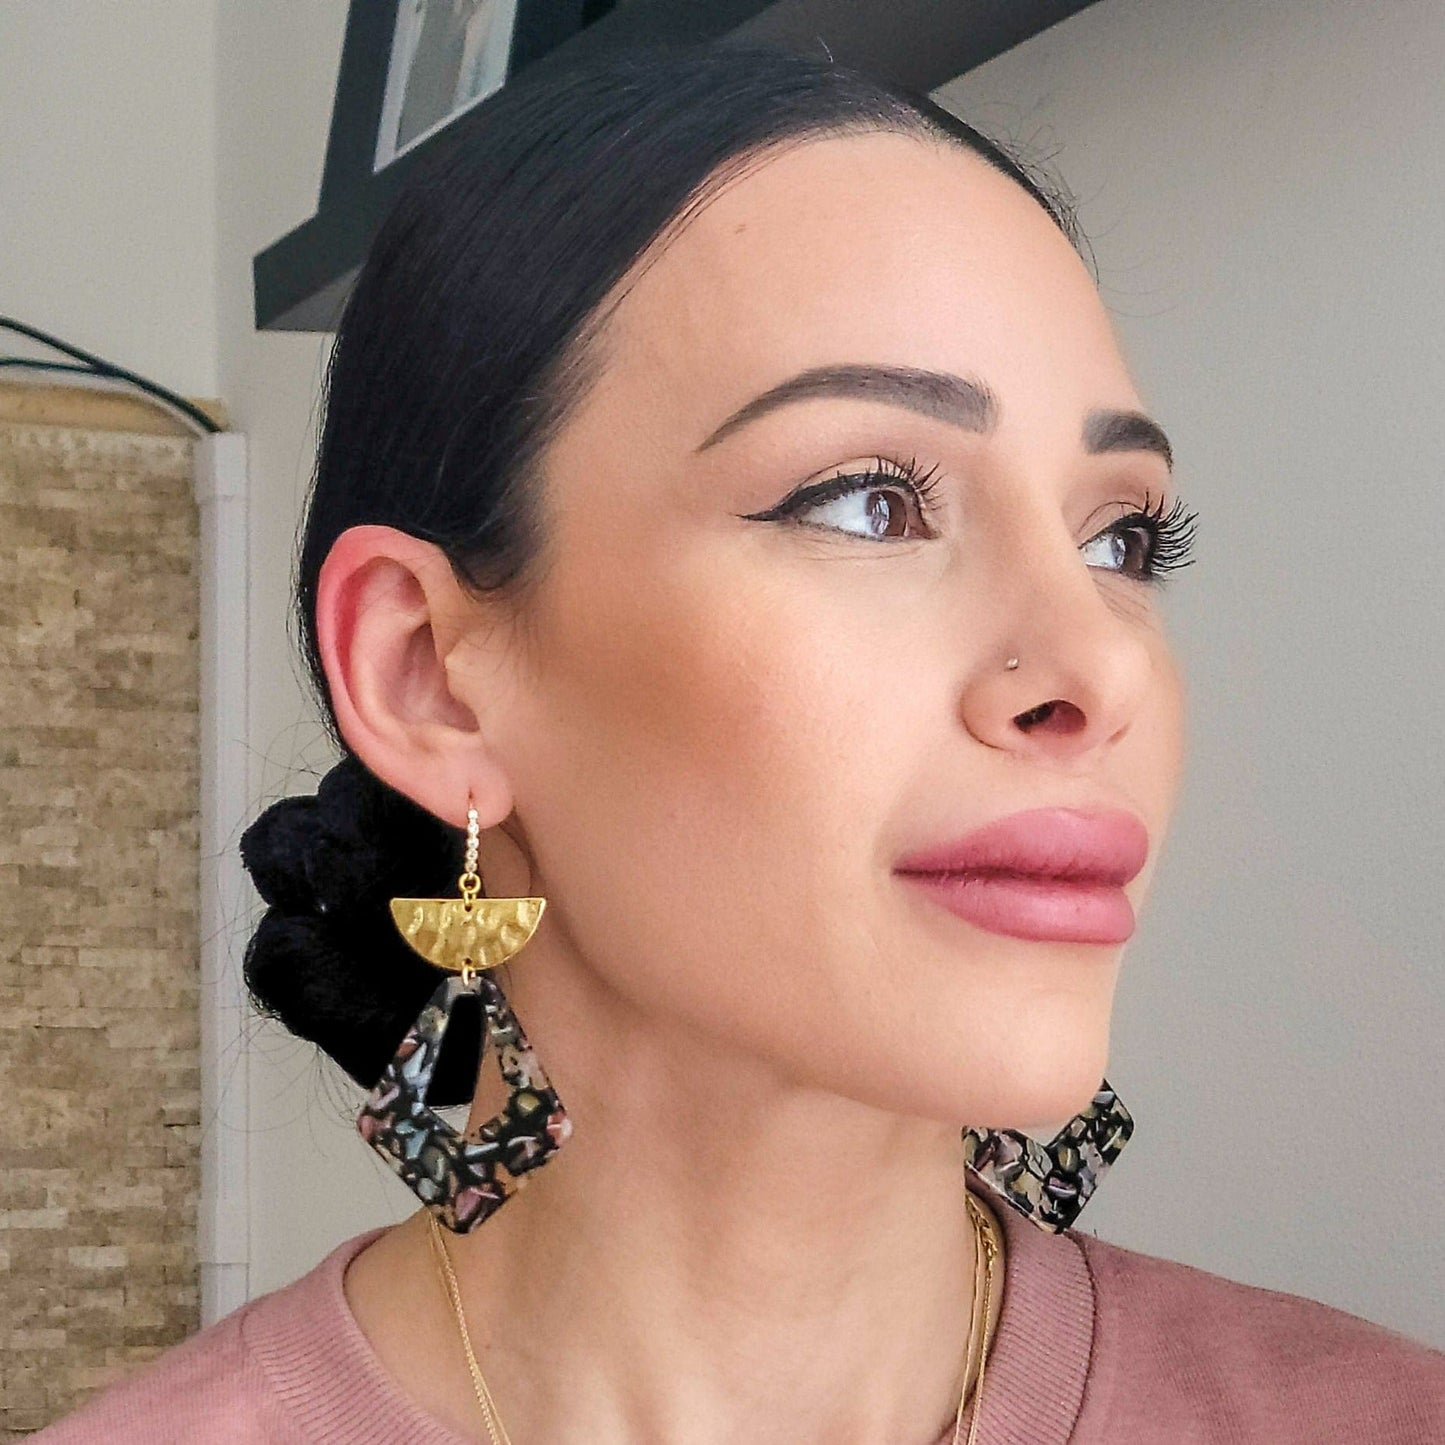 Seren and Skye Acetate Statement earrings on model. Earrings feature a tear drop space with half-moon hammered gold accent on a cubic-zirconia encrusted ear wire